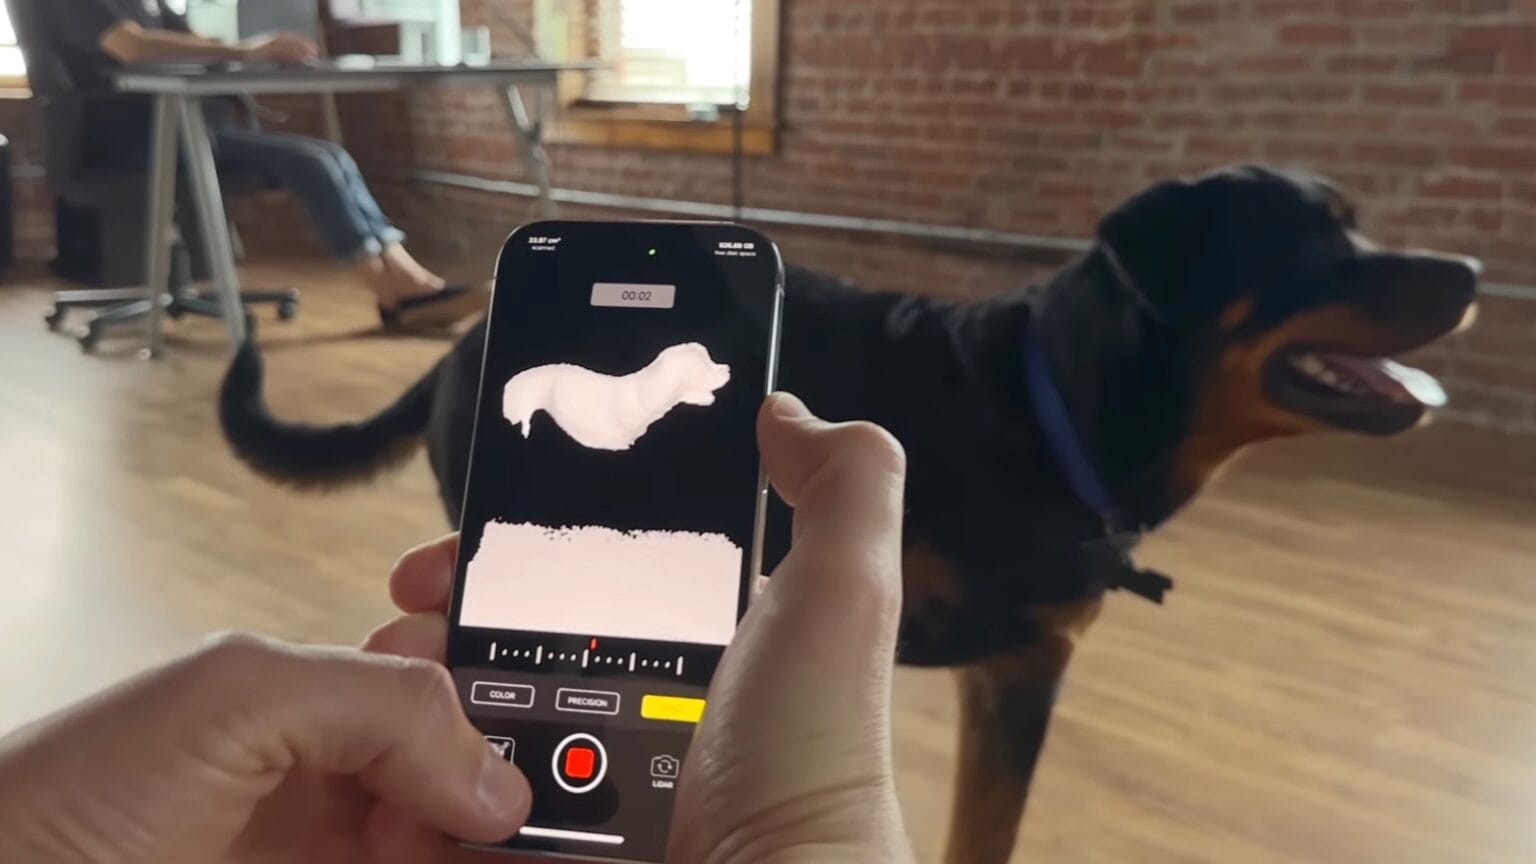 Adorable puppy prosthetics star in new ‘Shot on iPhone’ video